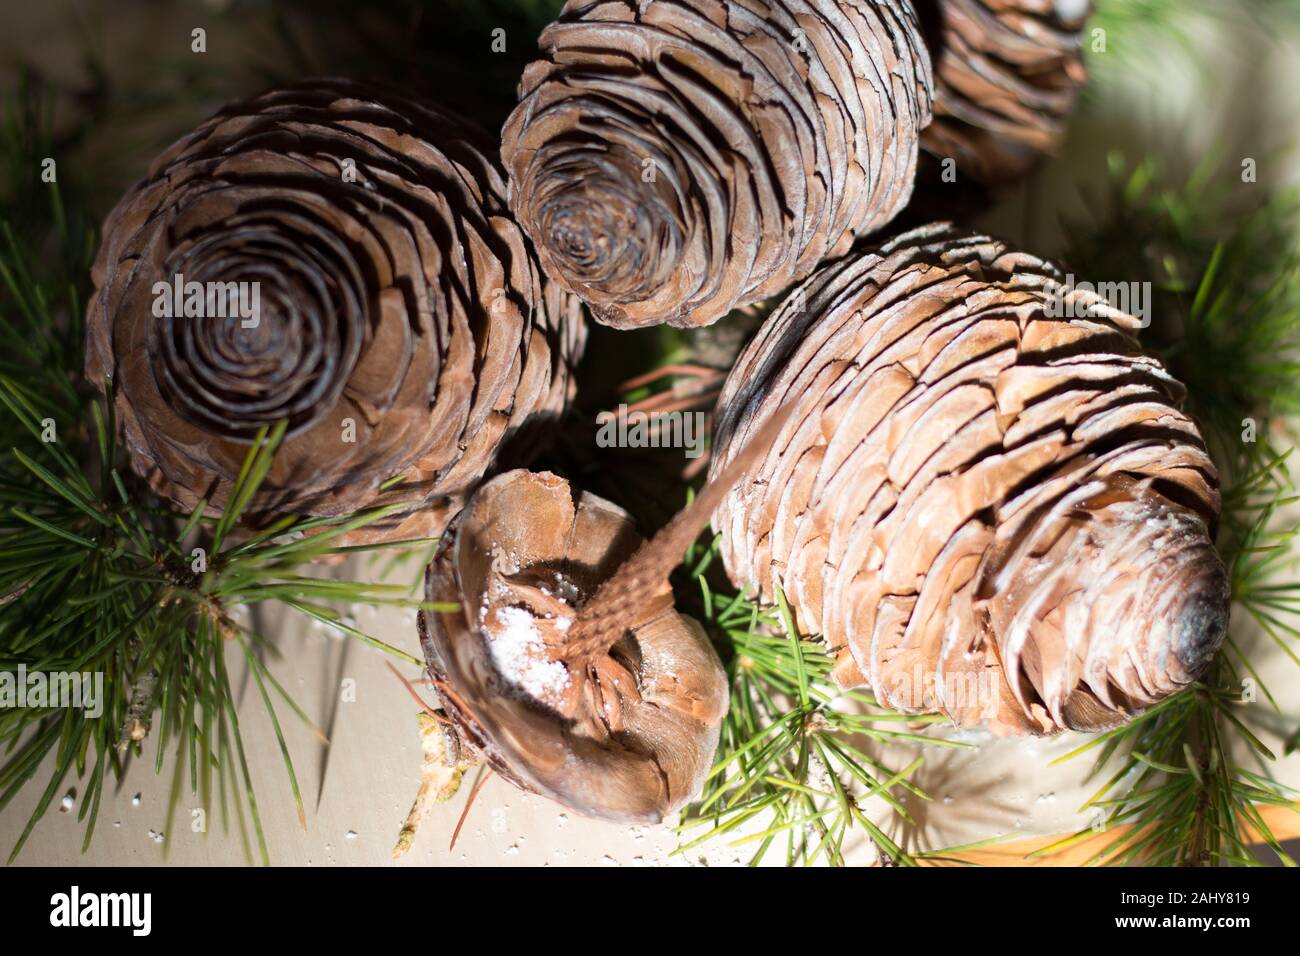 Strobilo, commonly called pine cone, used in Christmas decorations Stock Photo